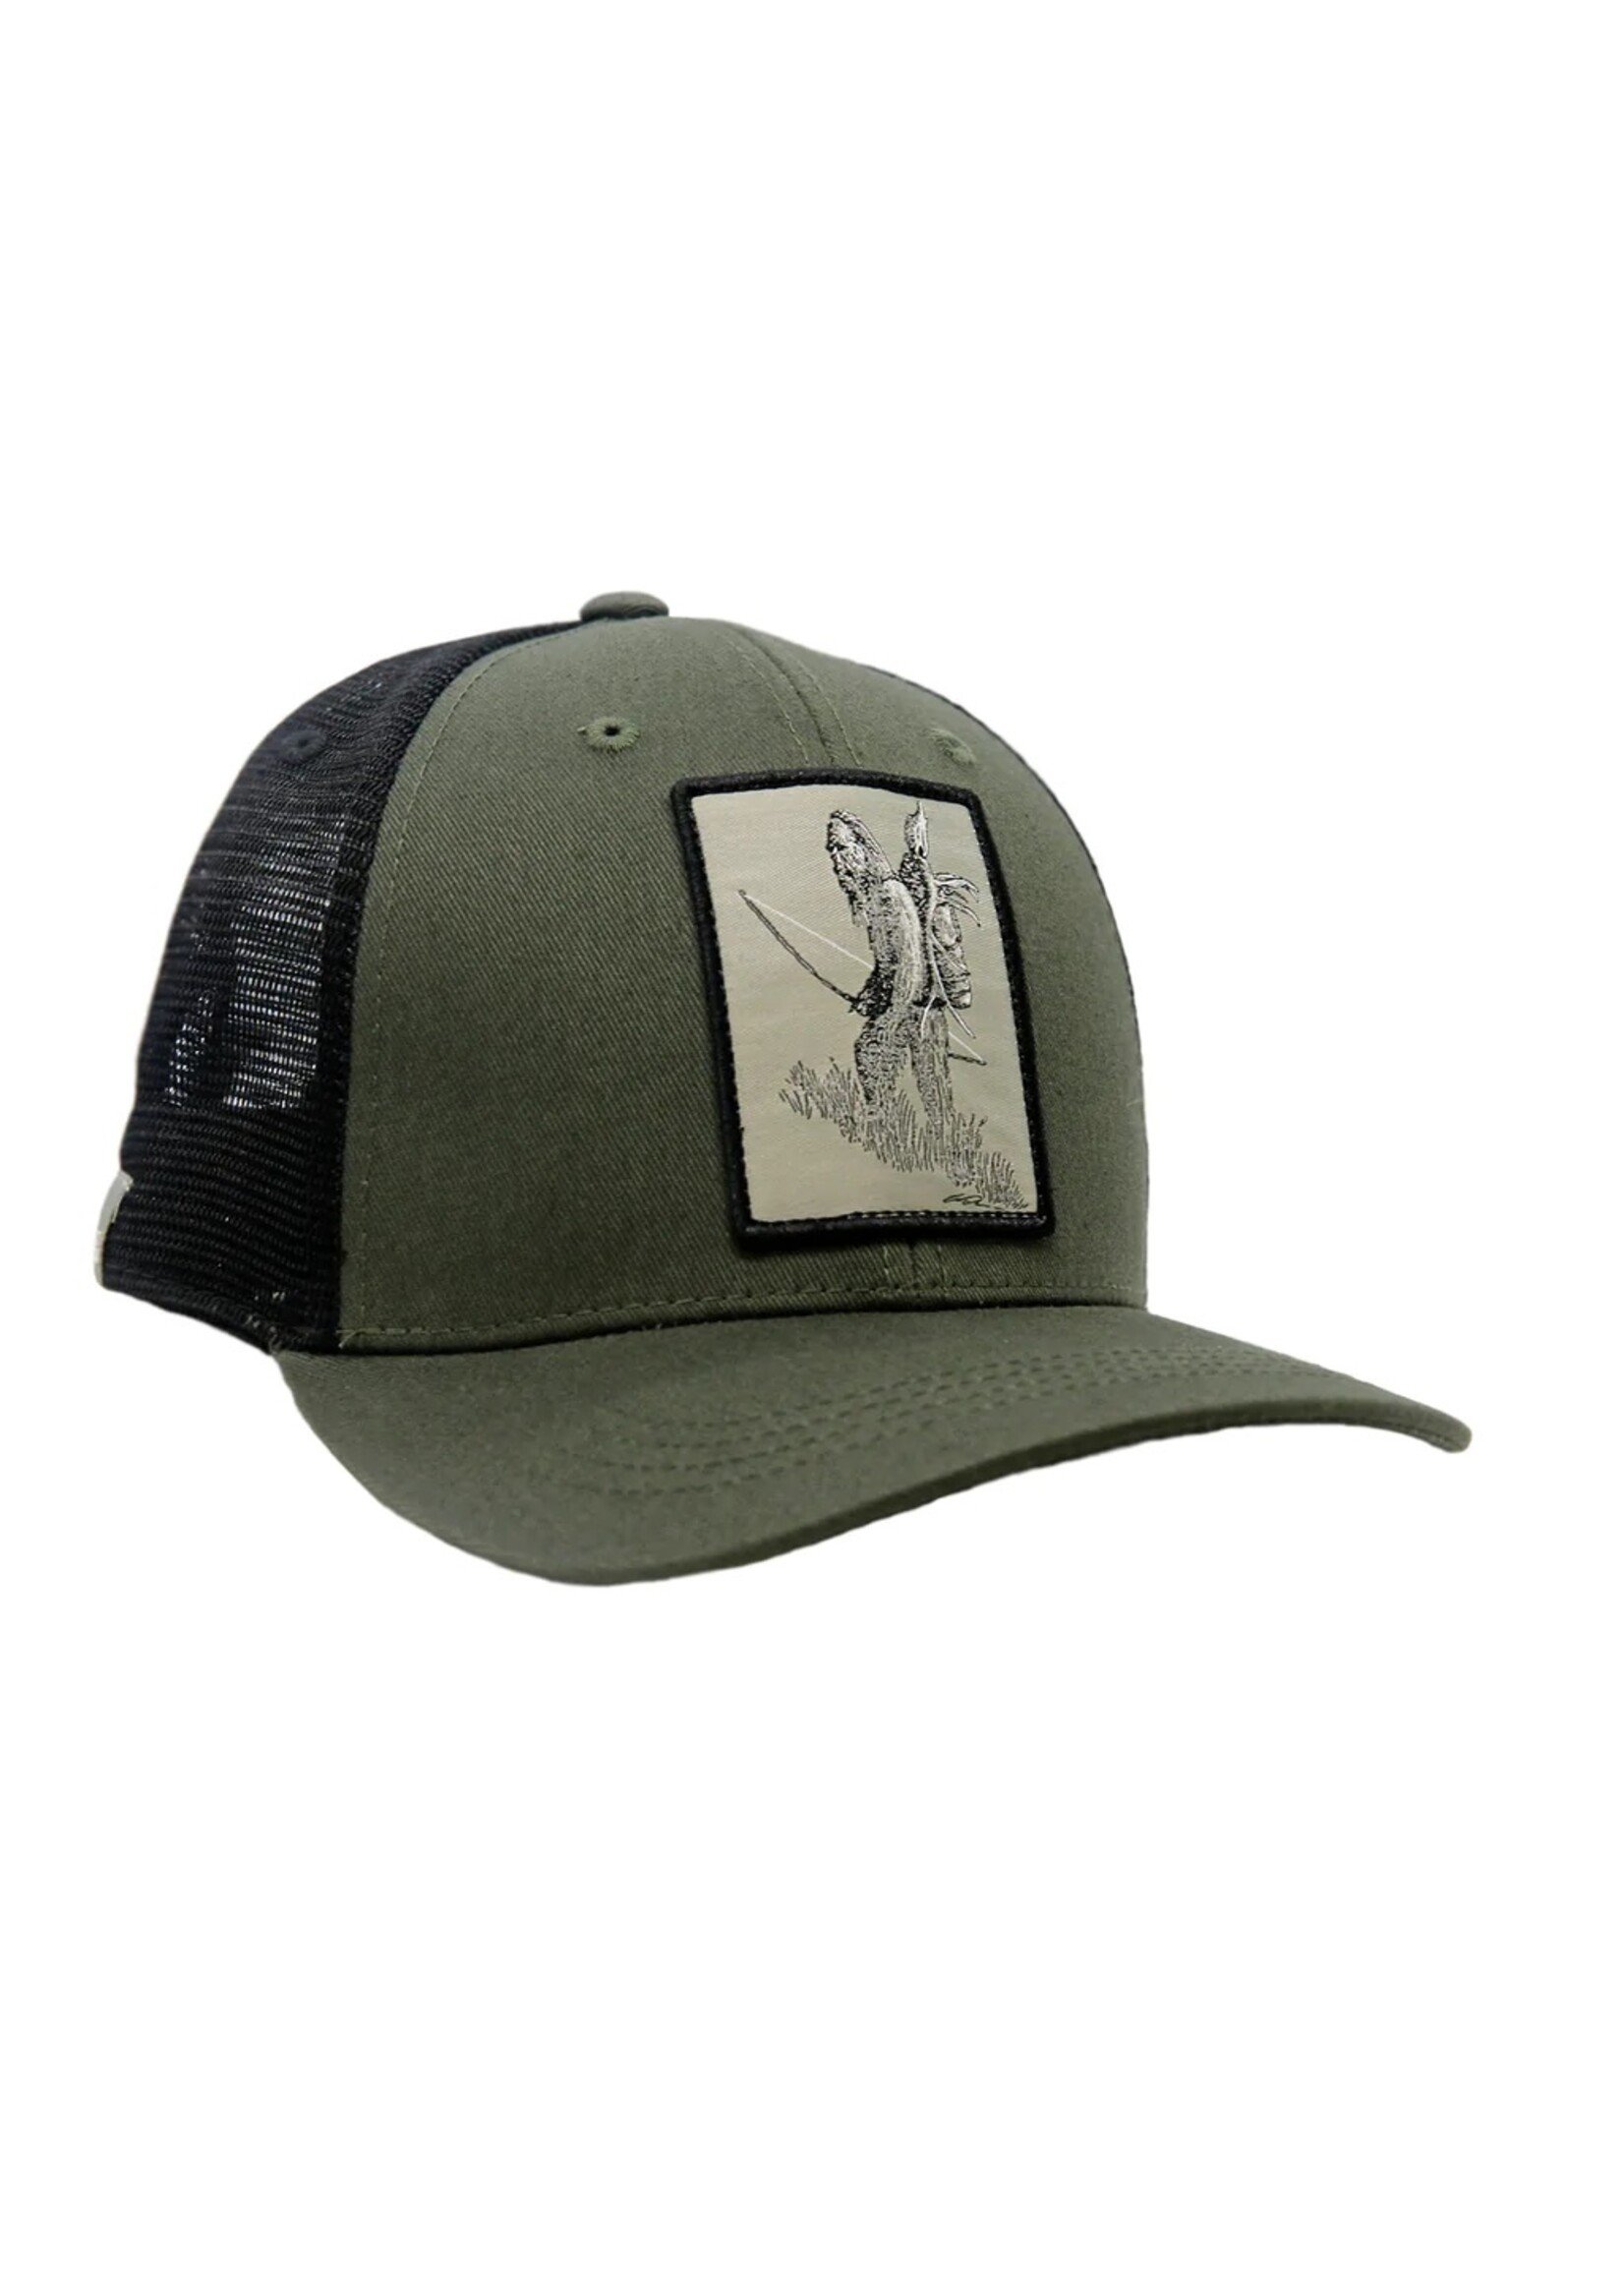 Rep Your Water RepYourWater Backcountry Squatch Hat